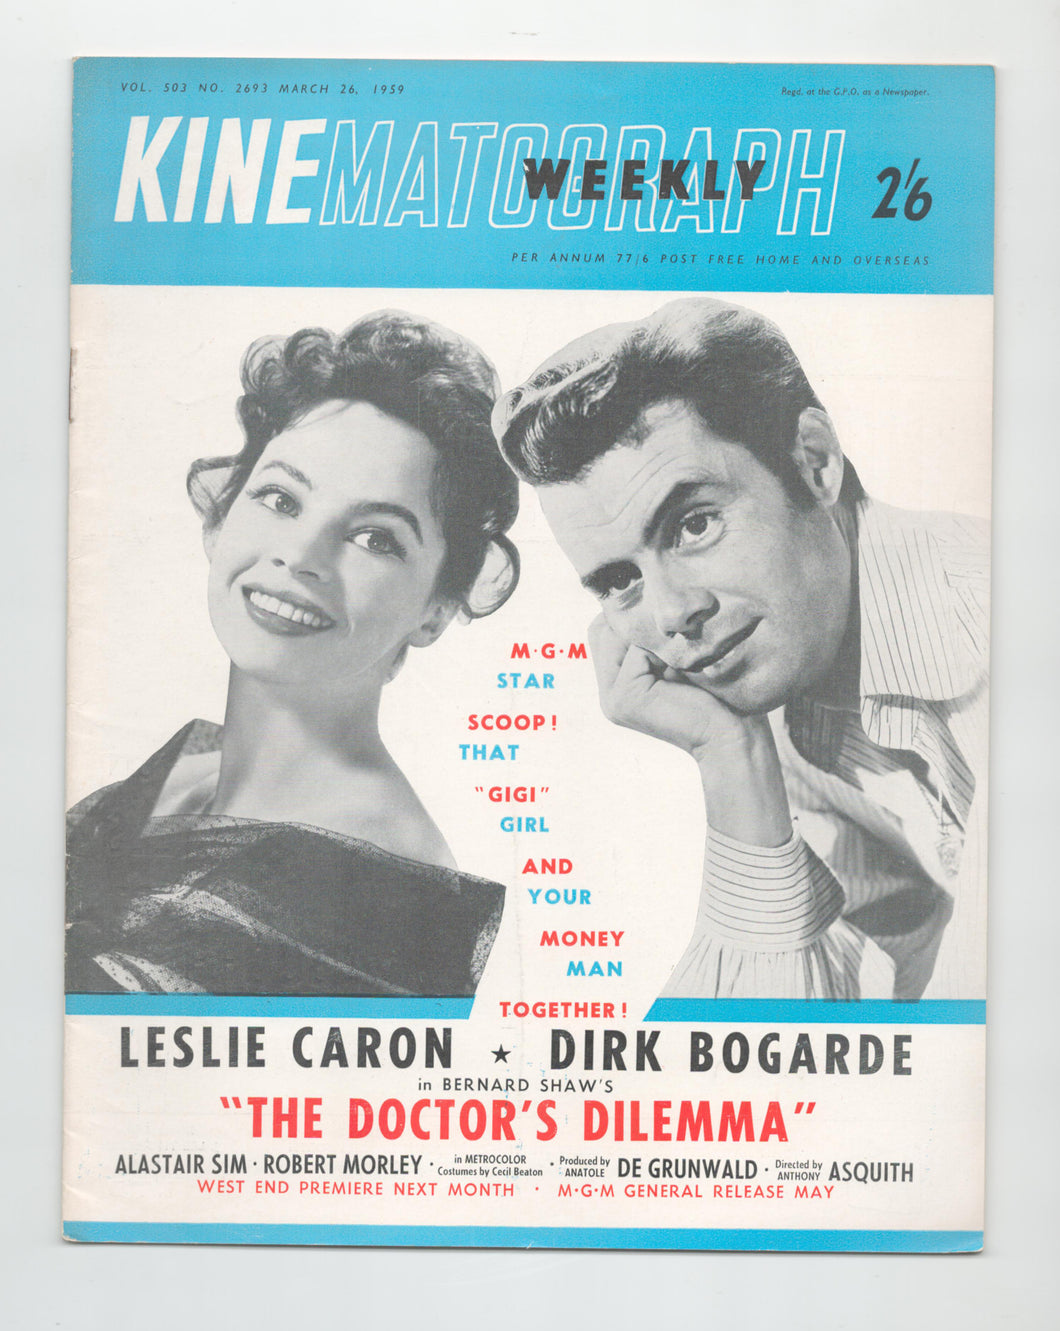 Kine Weekly No 2693 March 26 1959